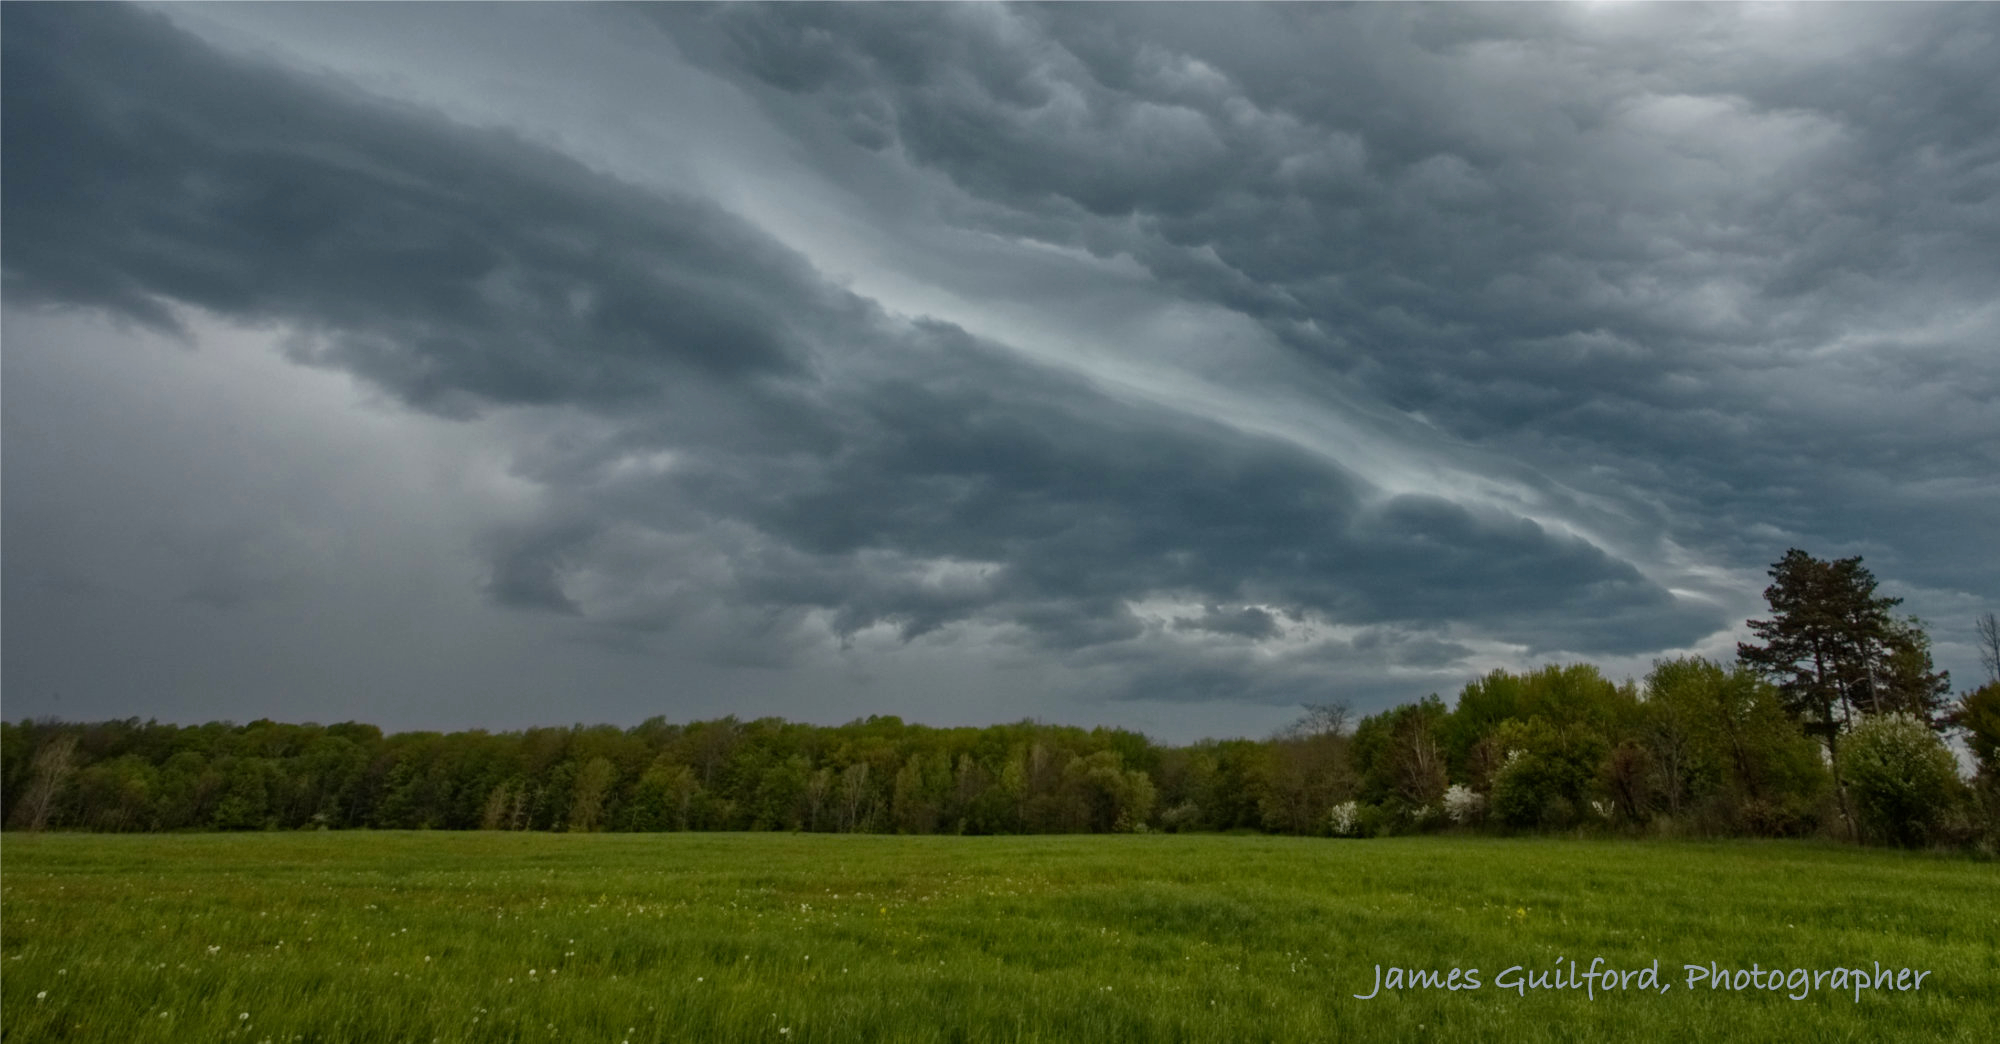 Photo: Impressive structure in an approaching storm. Photo by James Guilford.